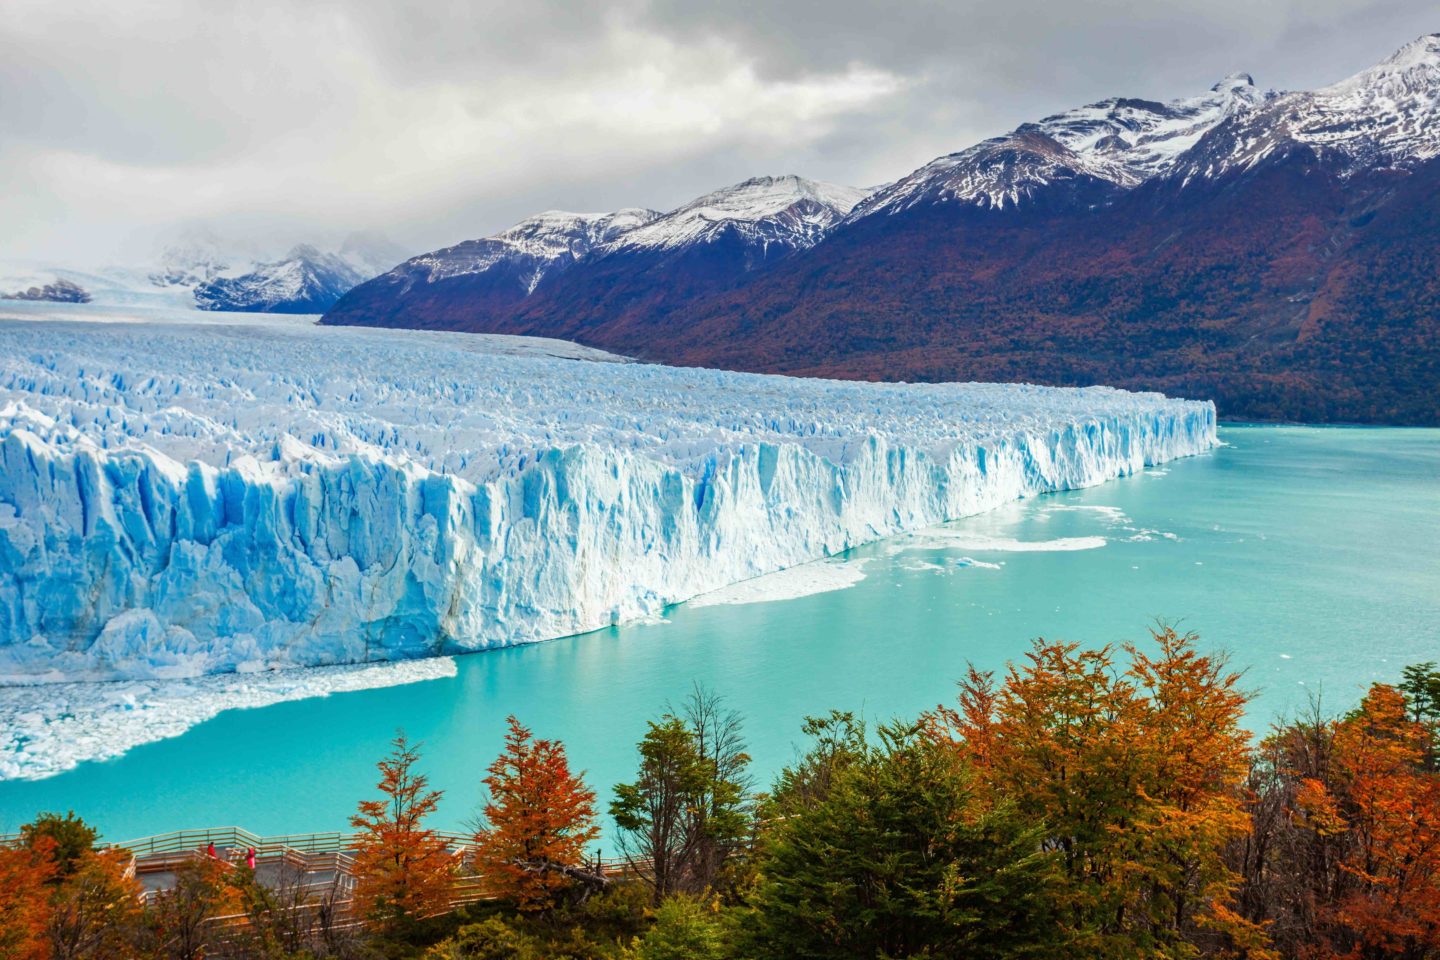 A turquoise glacier with water around it and autumnal trees in the foreground.